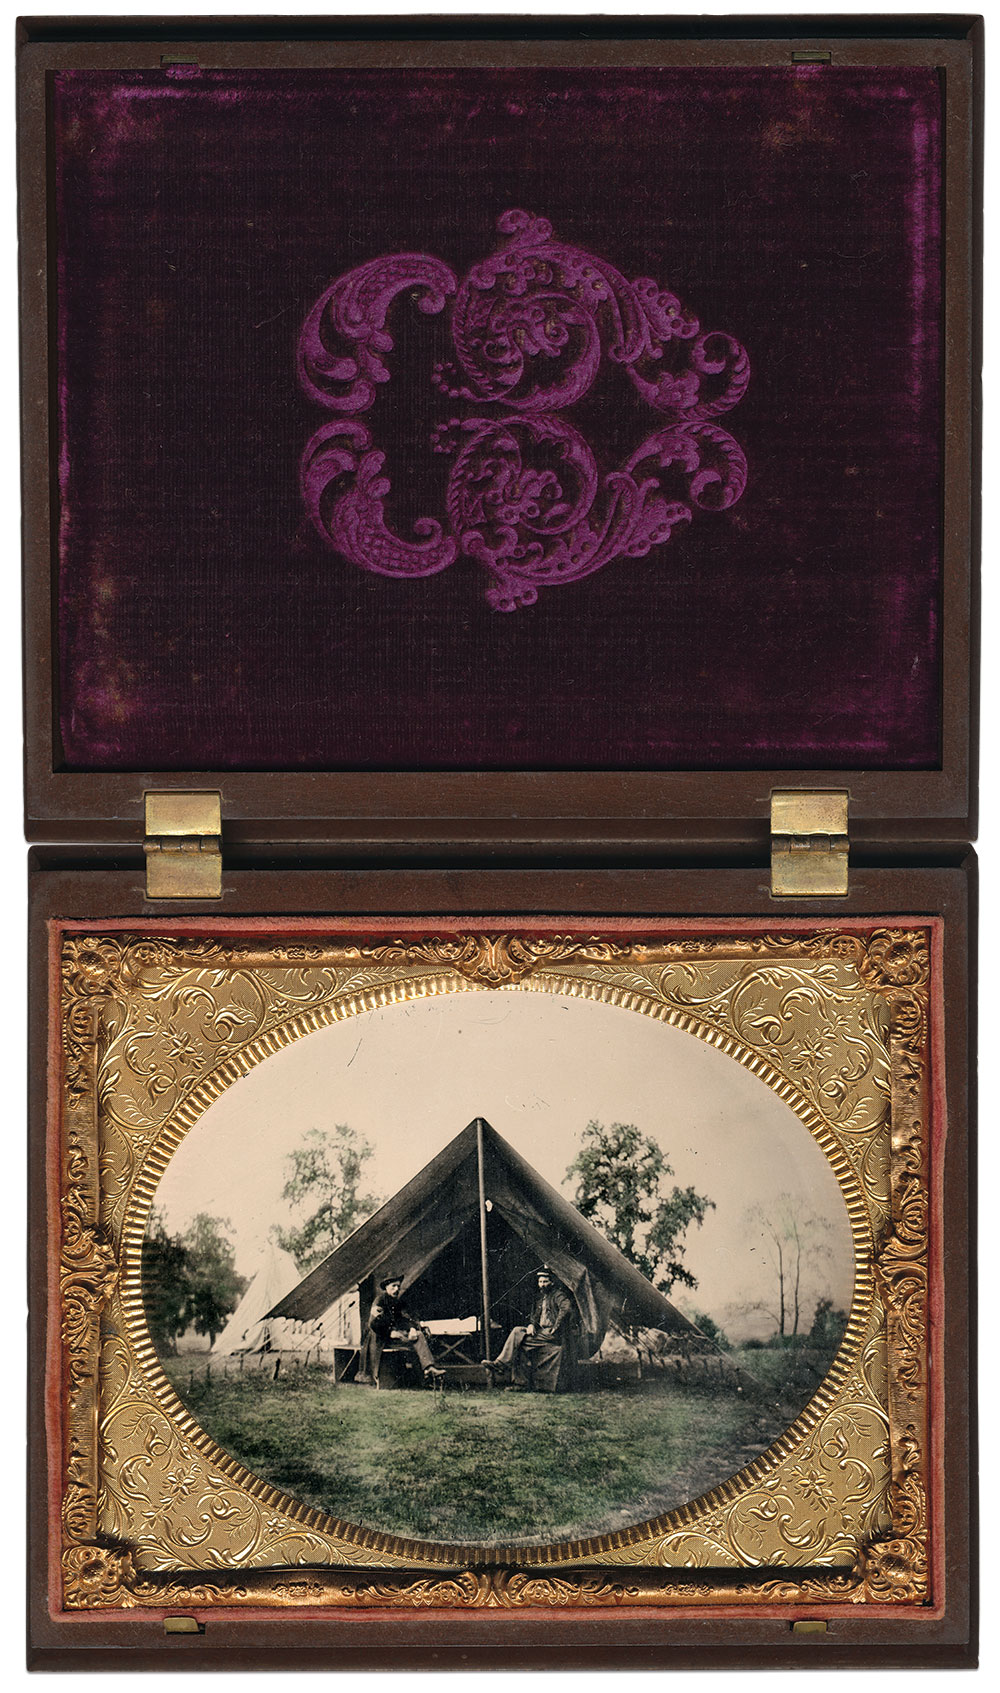 Half-plate ruby ambrotype by an anonymous photographer.